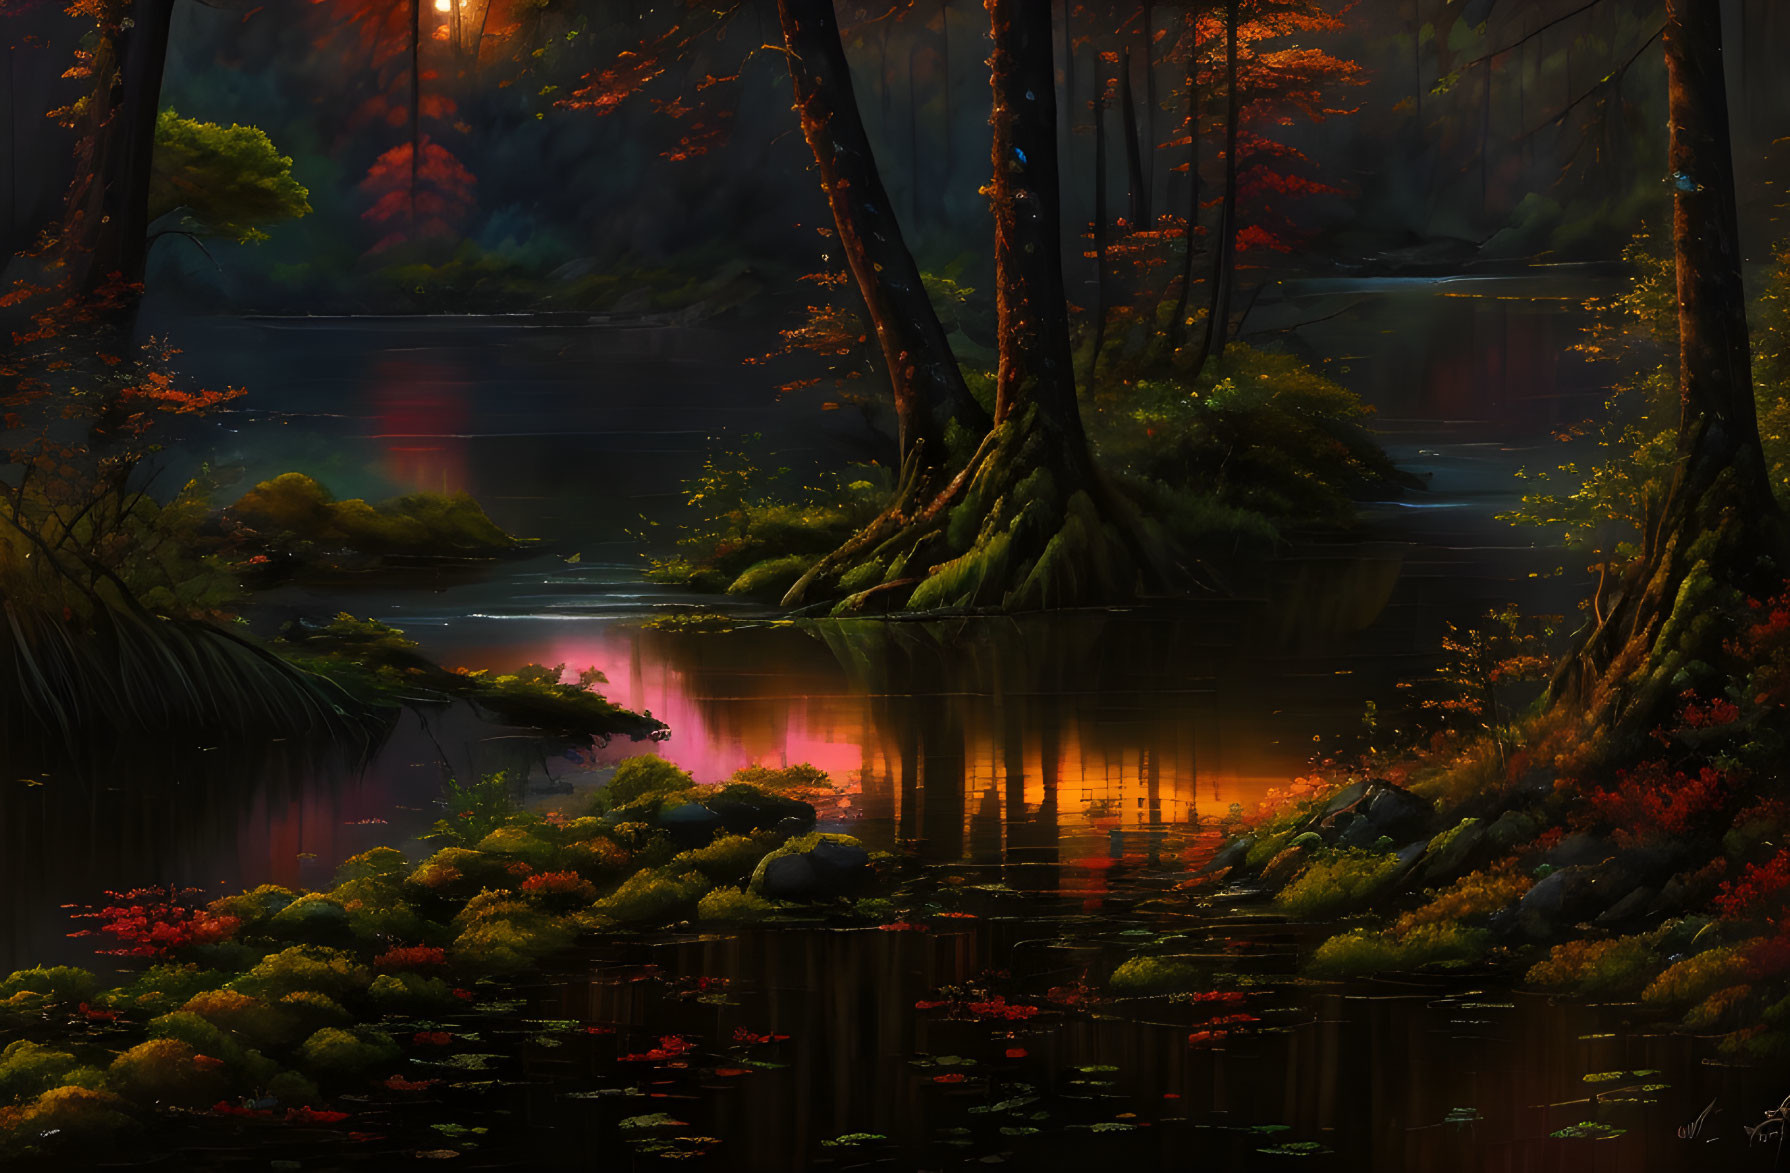 Tranquil twilight forest scene with reflective river and autumnal trees